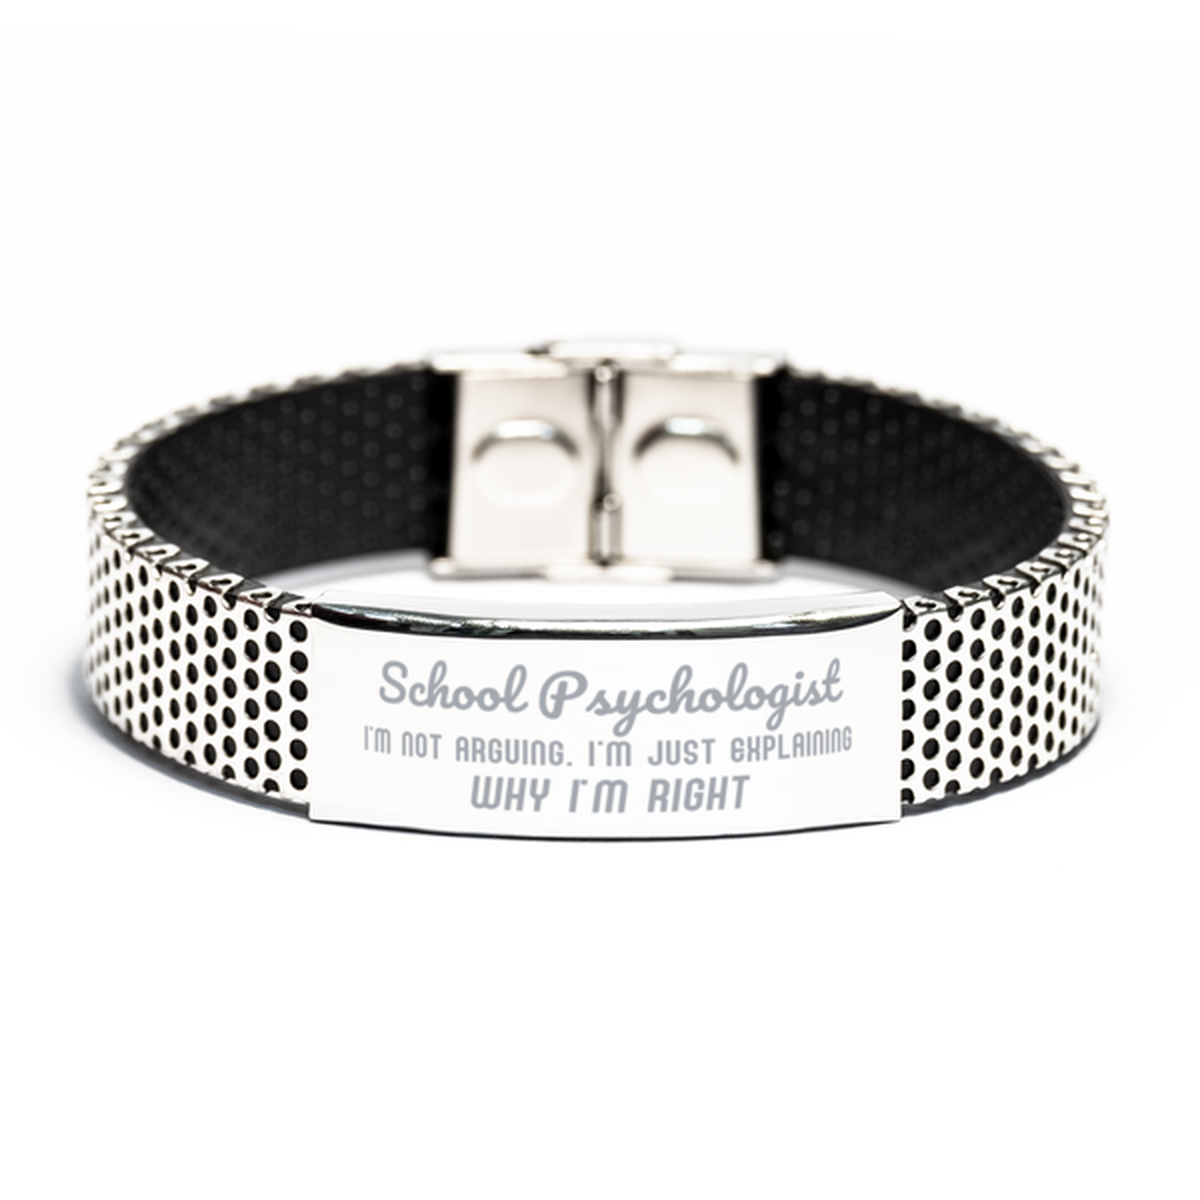 School Psychologist I'm not Arguing. I'm Just Explaining Why I'm RIGHT Stainless Steel Bracelet, Funny Saying Quote School Psychologist Gifts For School Psychologist Graduation Birthday Christmas Gifts for Men Women Coworker